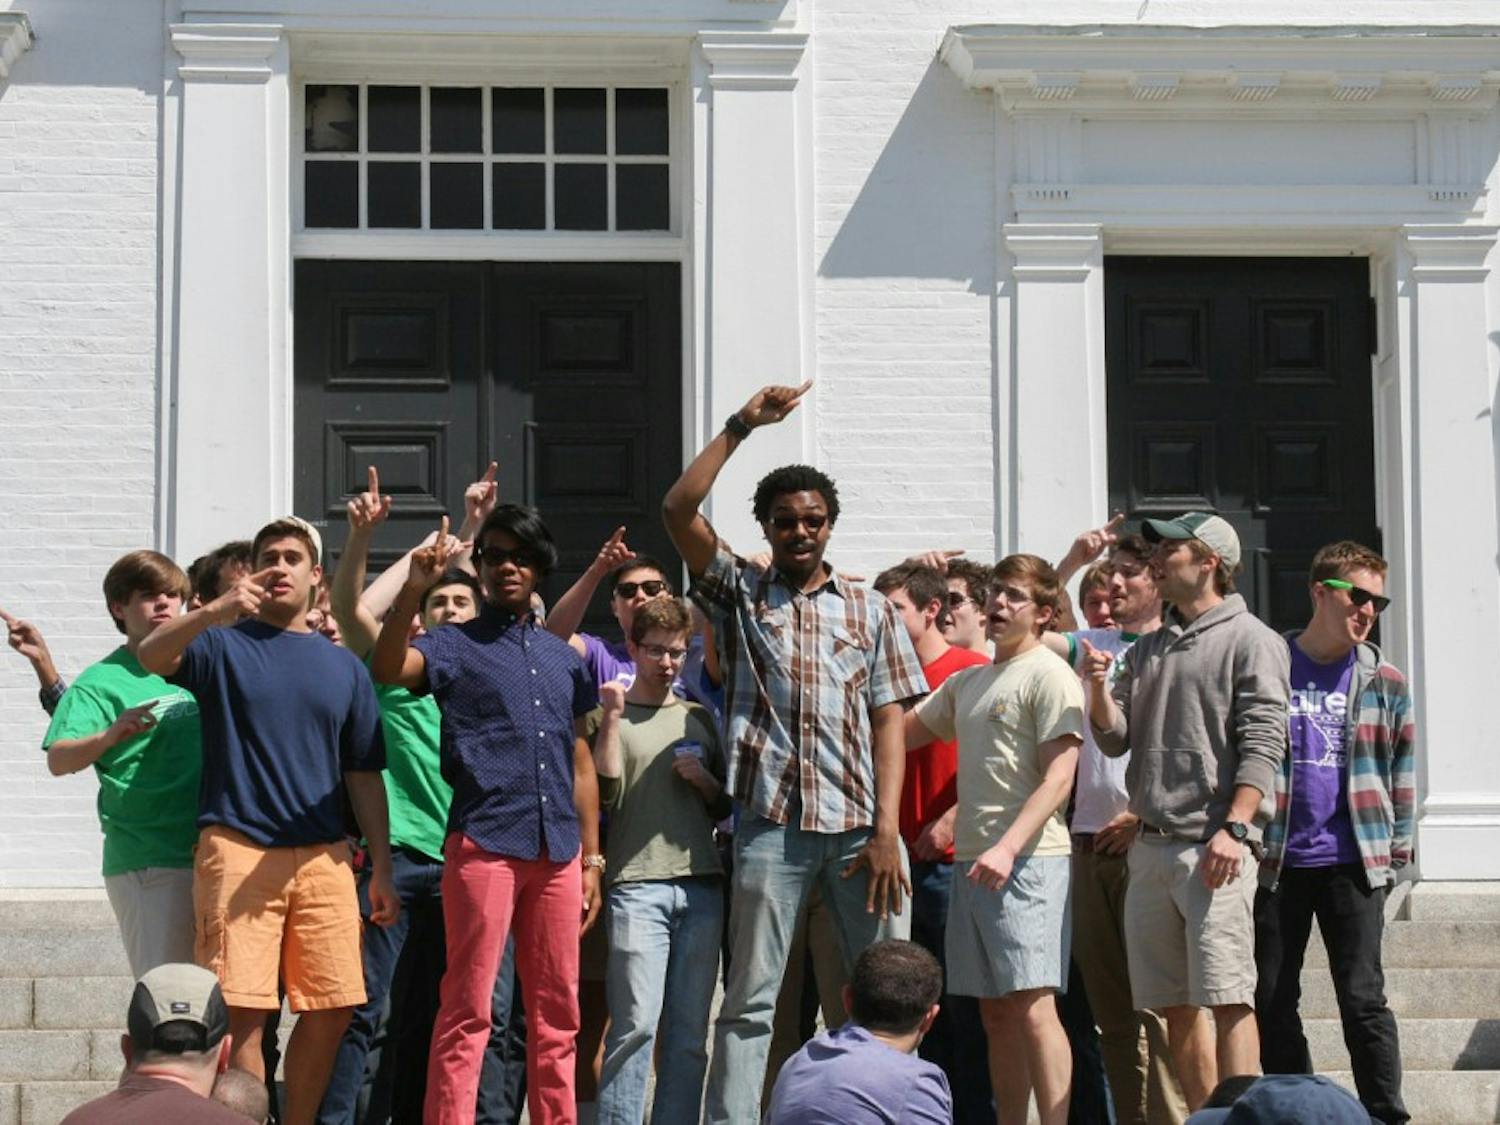 The Dartmouth Aires are one of the College’s all-male a cappella groups, pictured here performing at Dartmouth Hall.